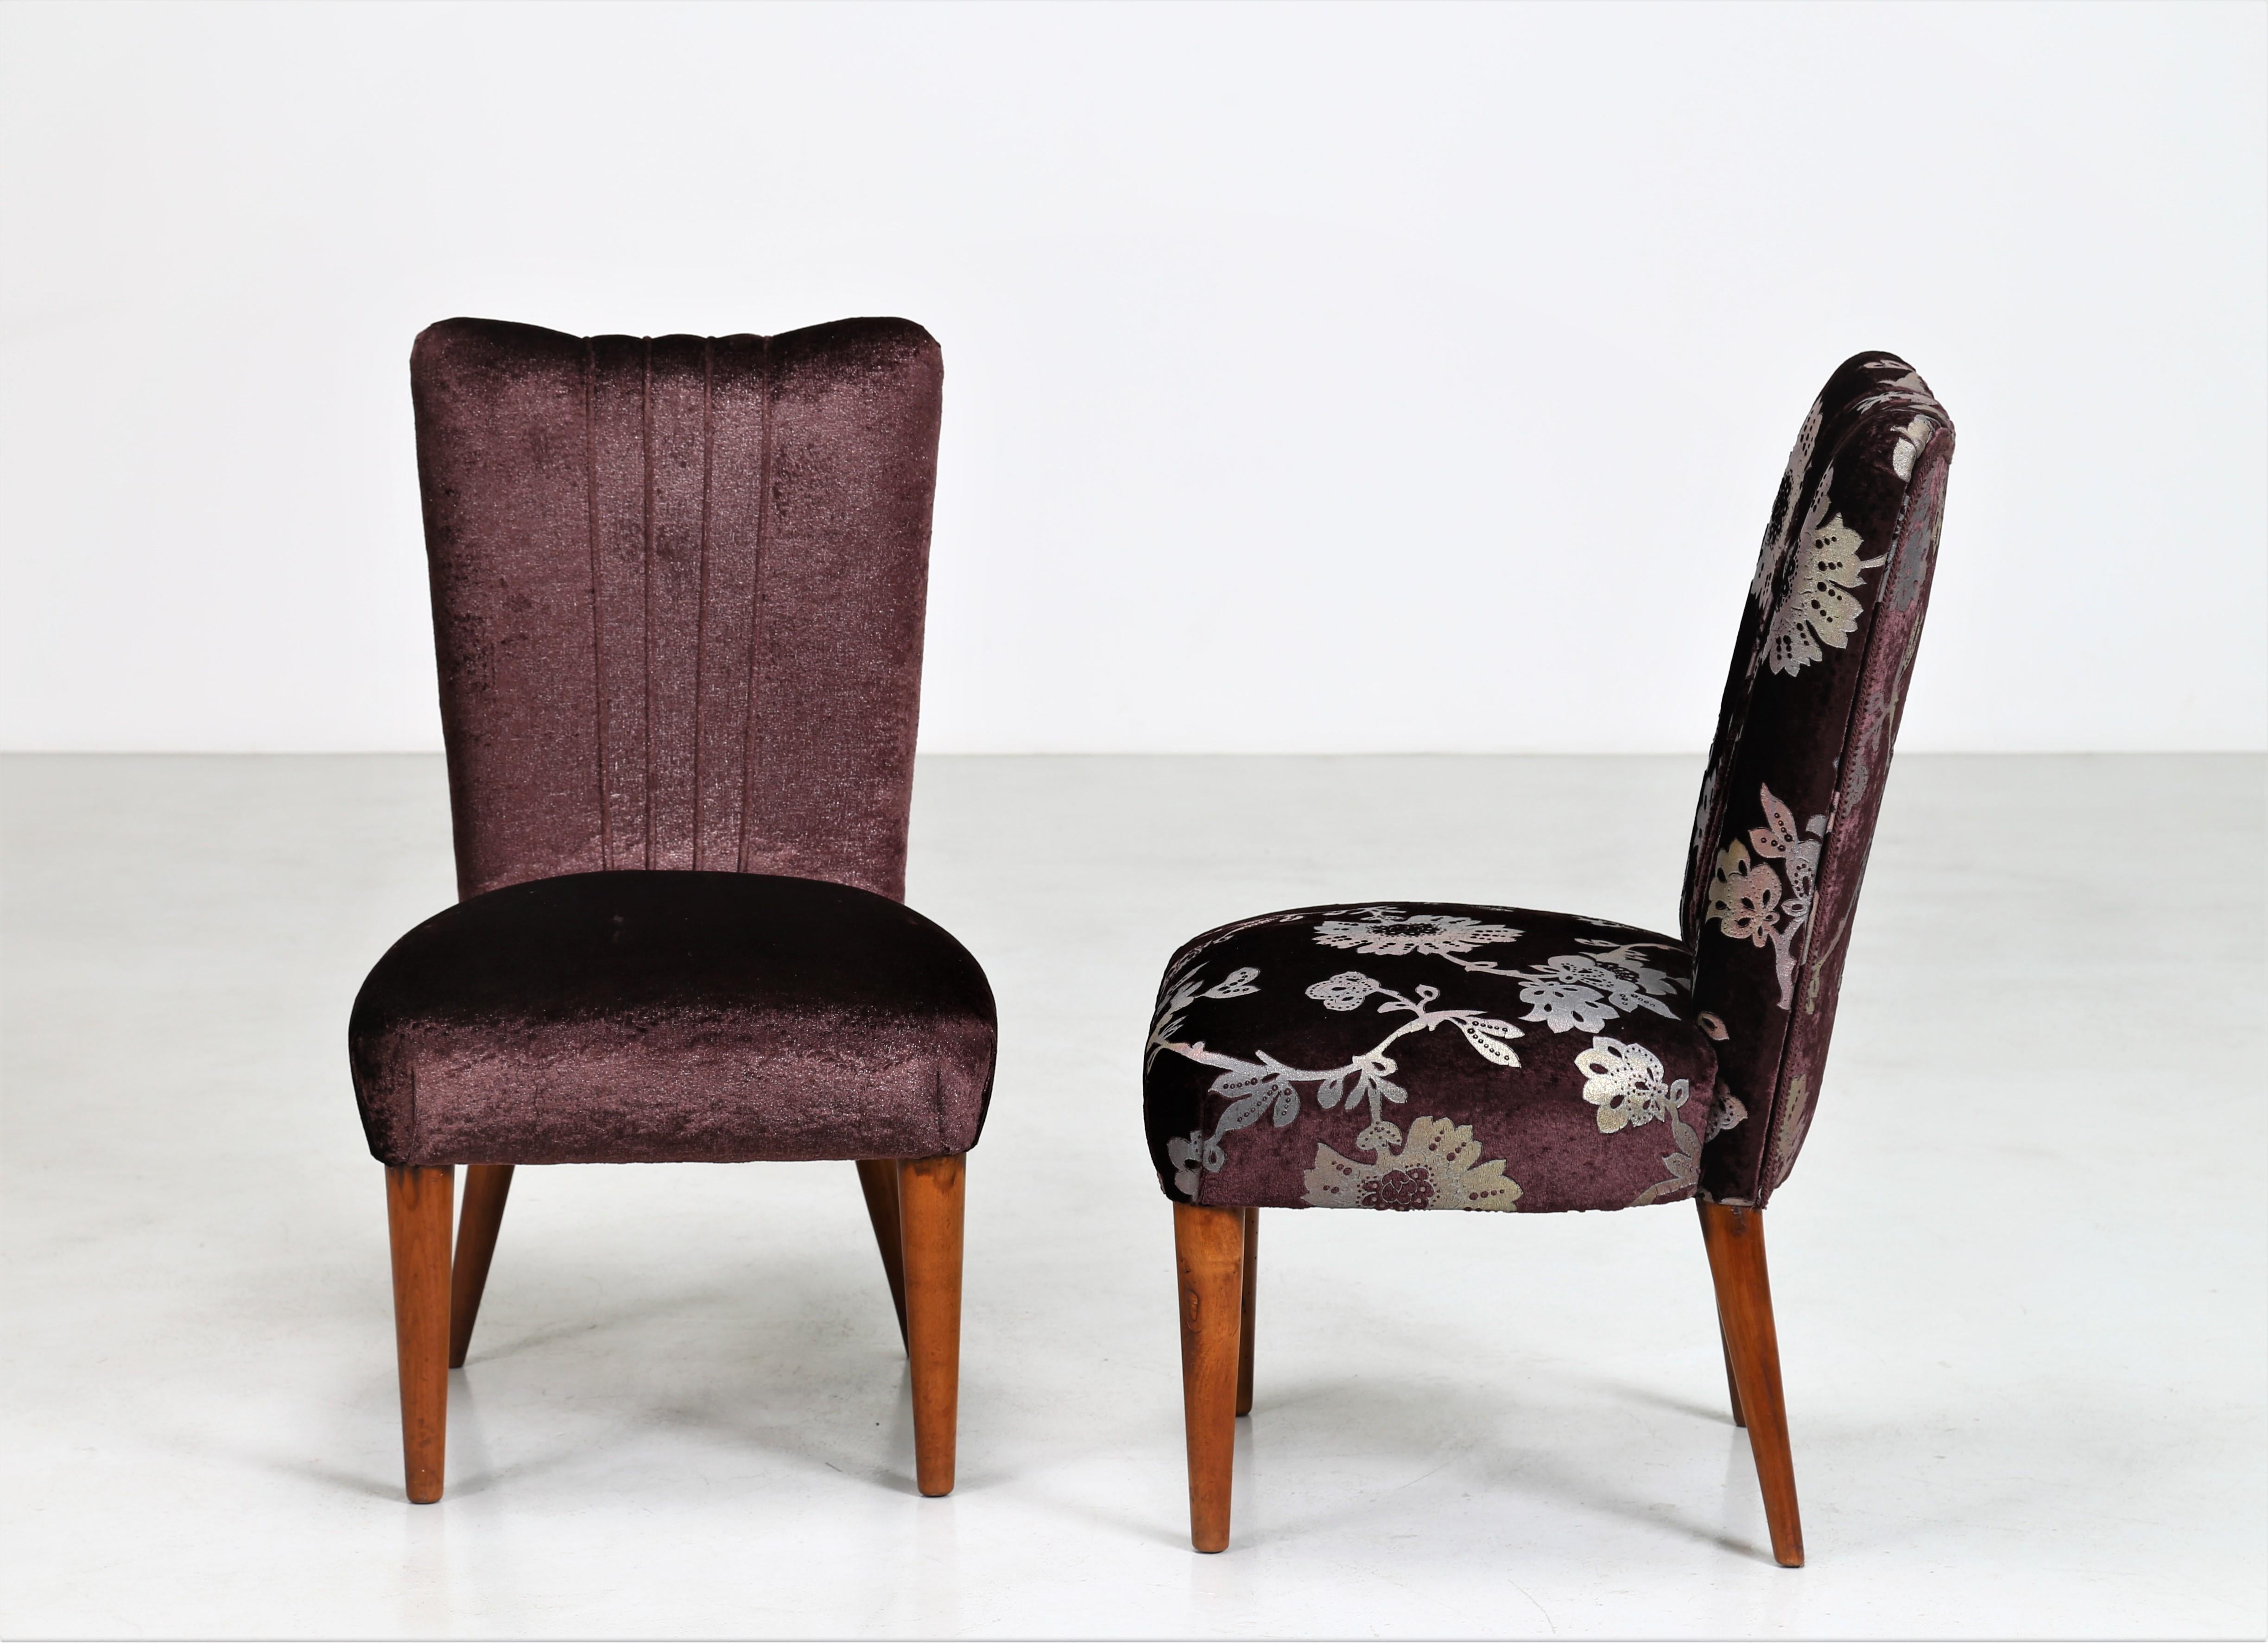 Pair of armchairs by designer Osvaldo Borsani, 1950 for ABV Arredamenti Borsani-Varedo. The armchairs still have the original fabric of the time and are upholstered in aubergine velvet in two different ways. The first is all in dark burgundy velvet,